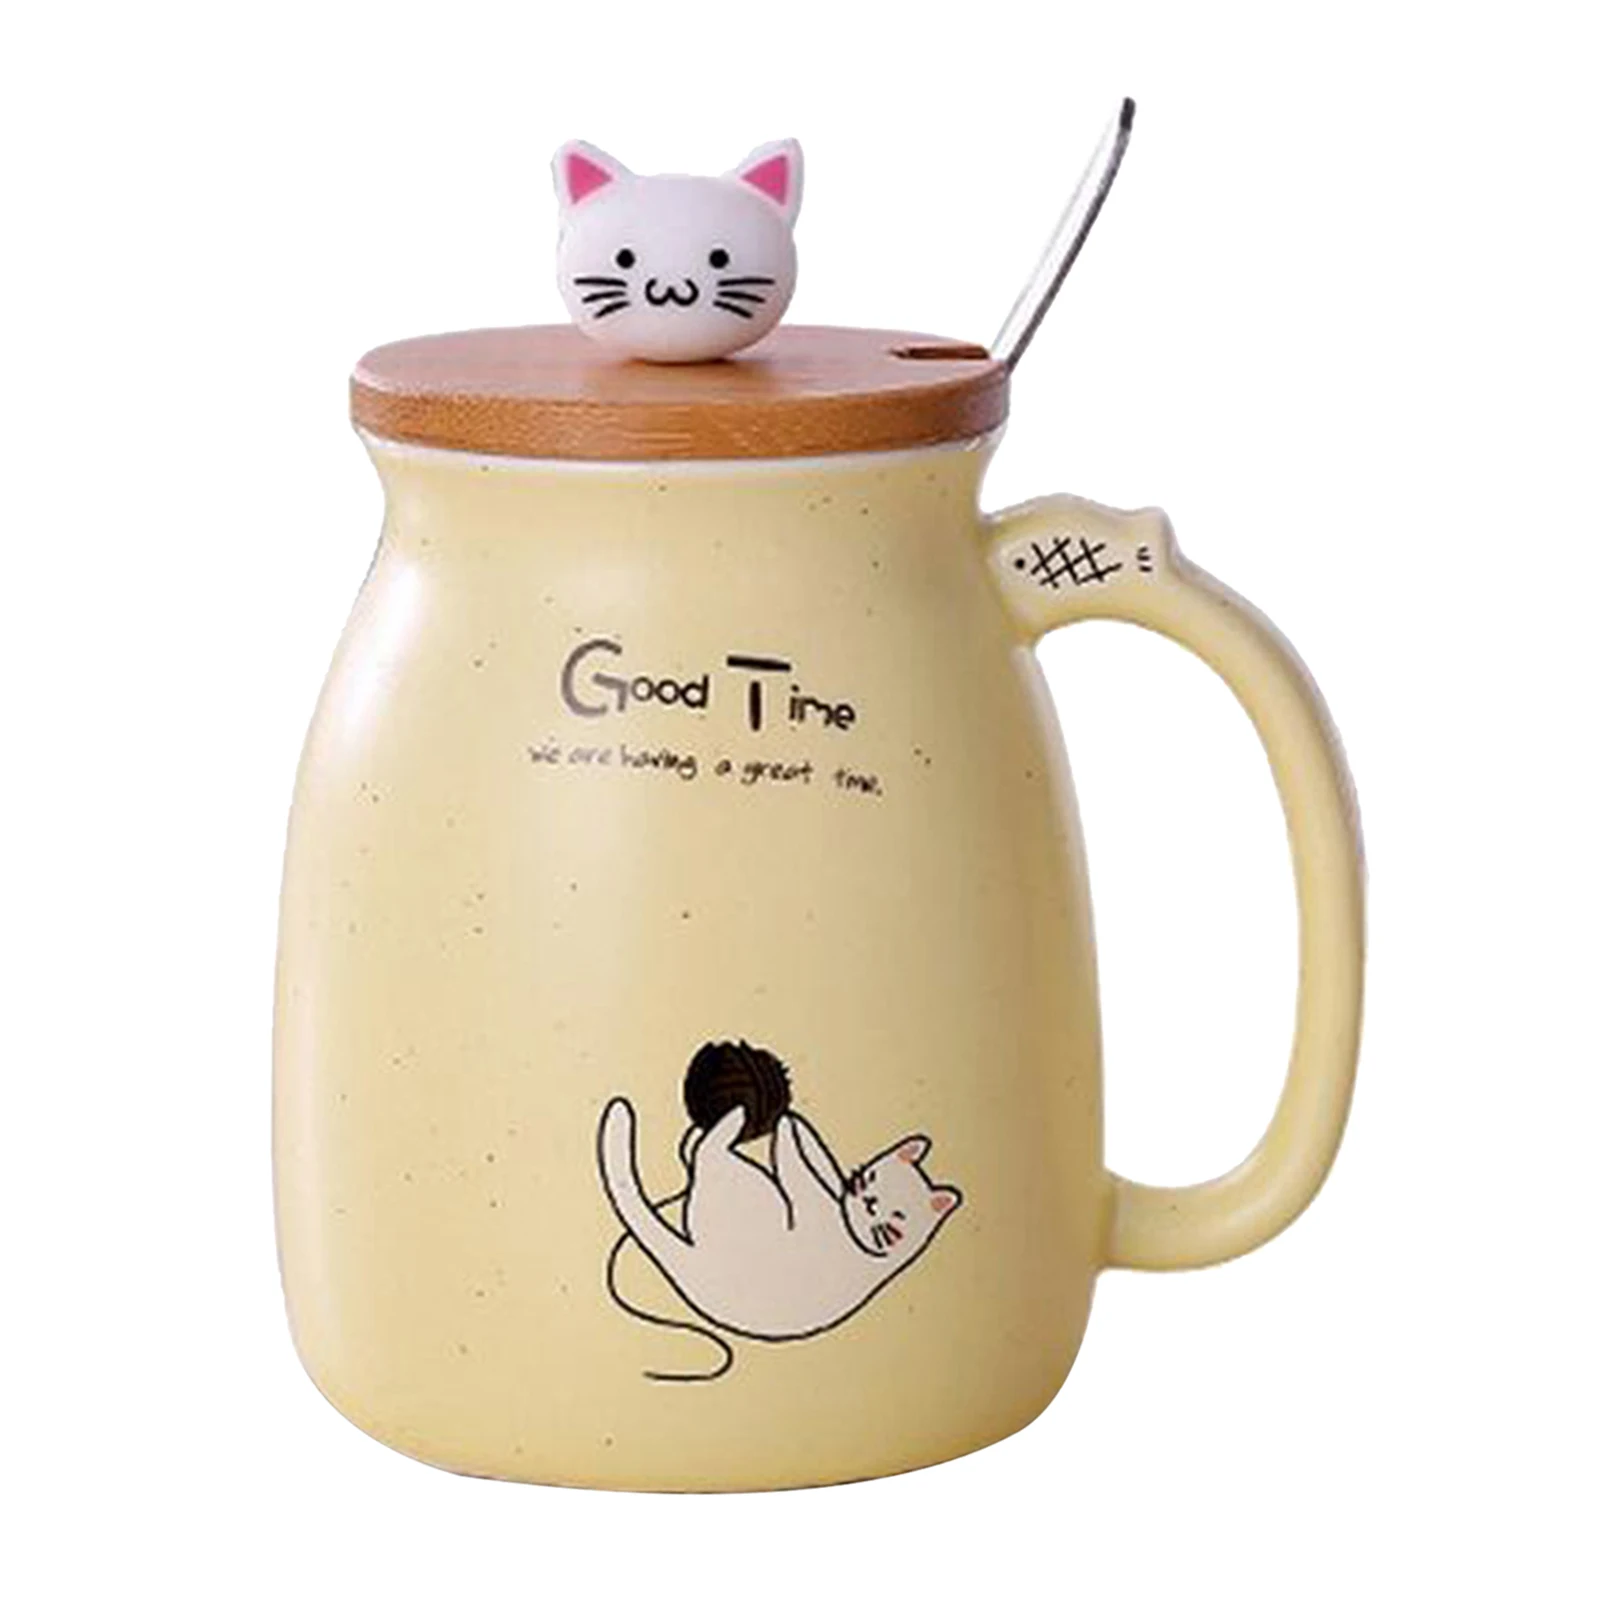 Cute Cat Ceramic Cup Hot Cold Tea Cup Milk Coffee Mug with Spoon Lid Pink